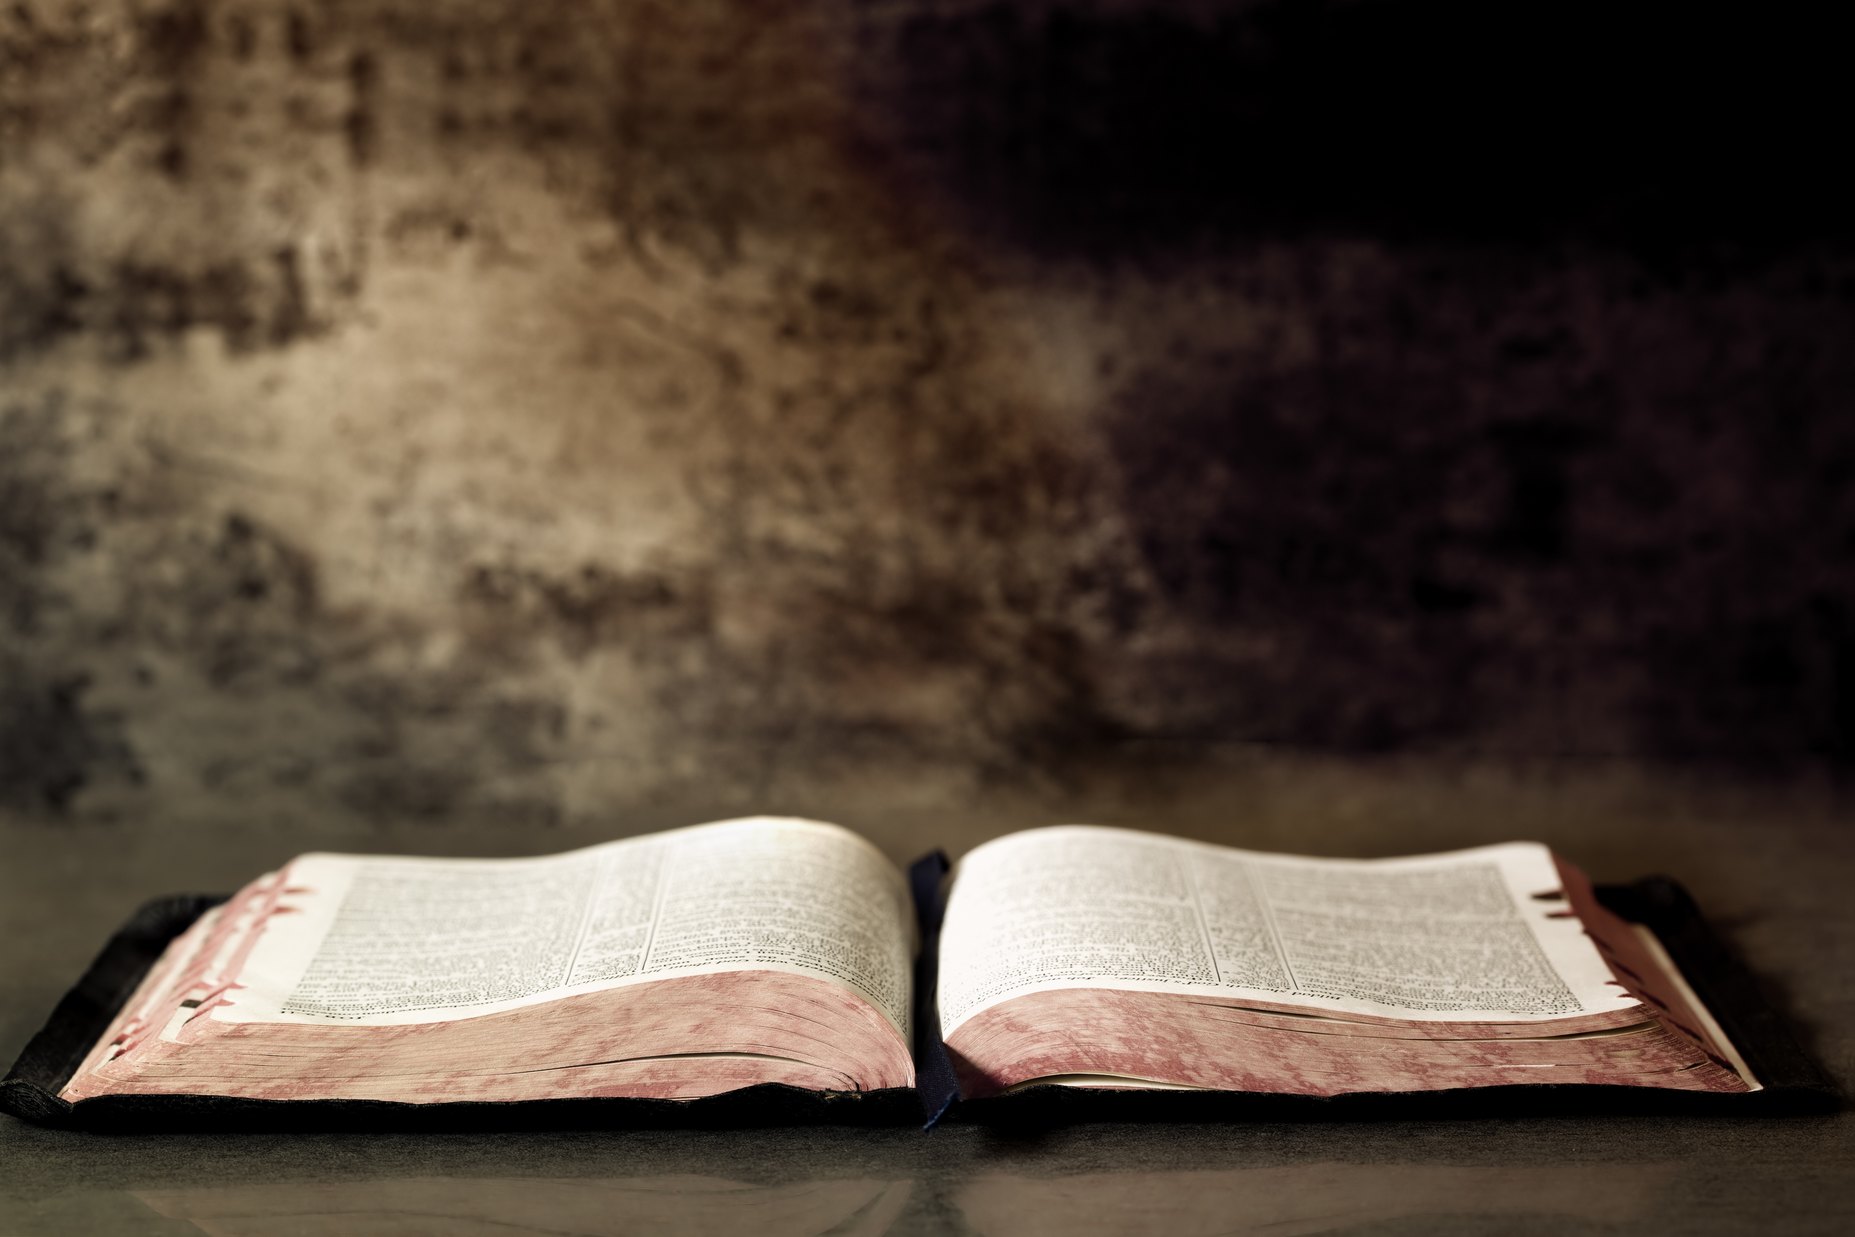 Gay Man To Sue Bible Publishers Coercion Code Dark Times are